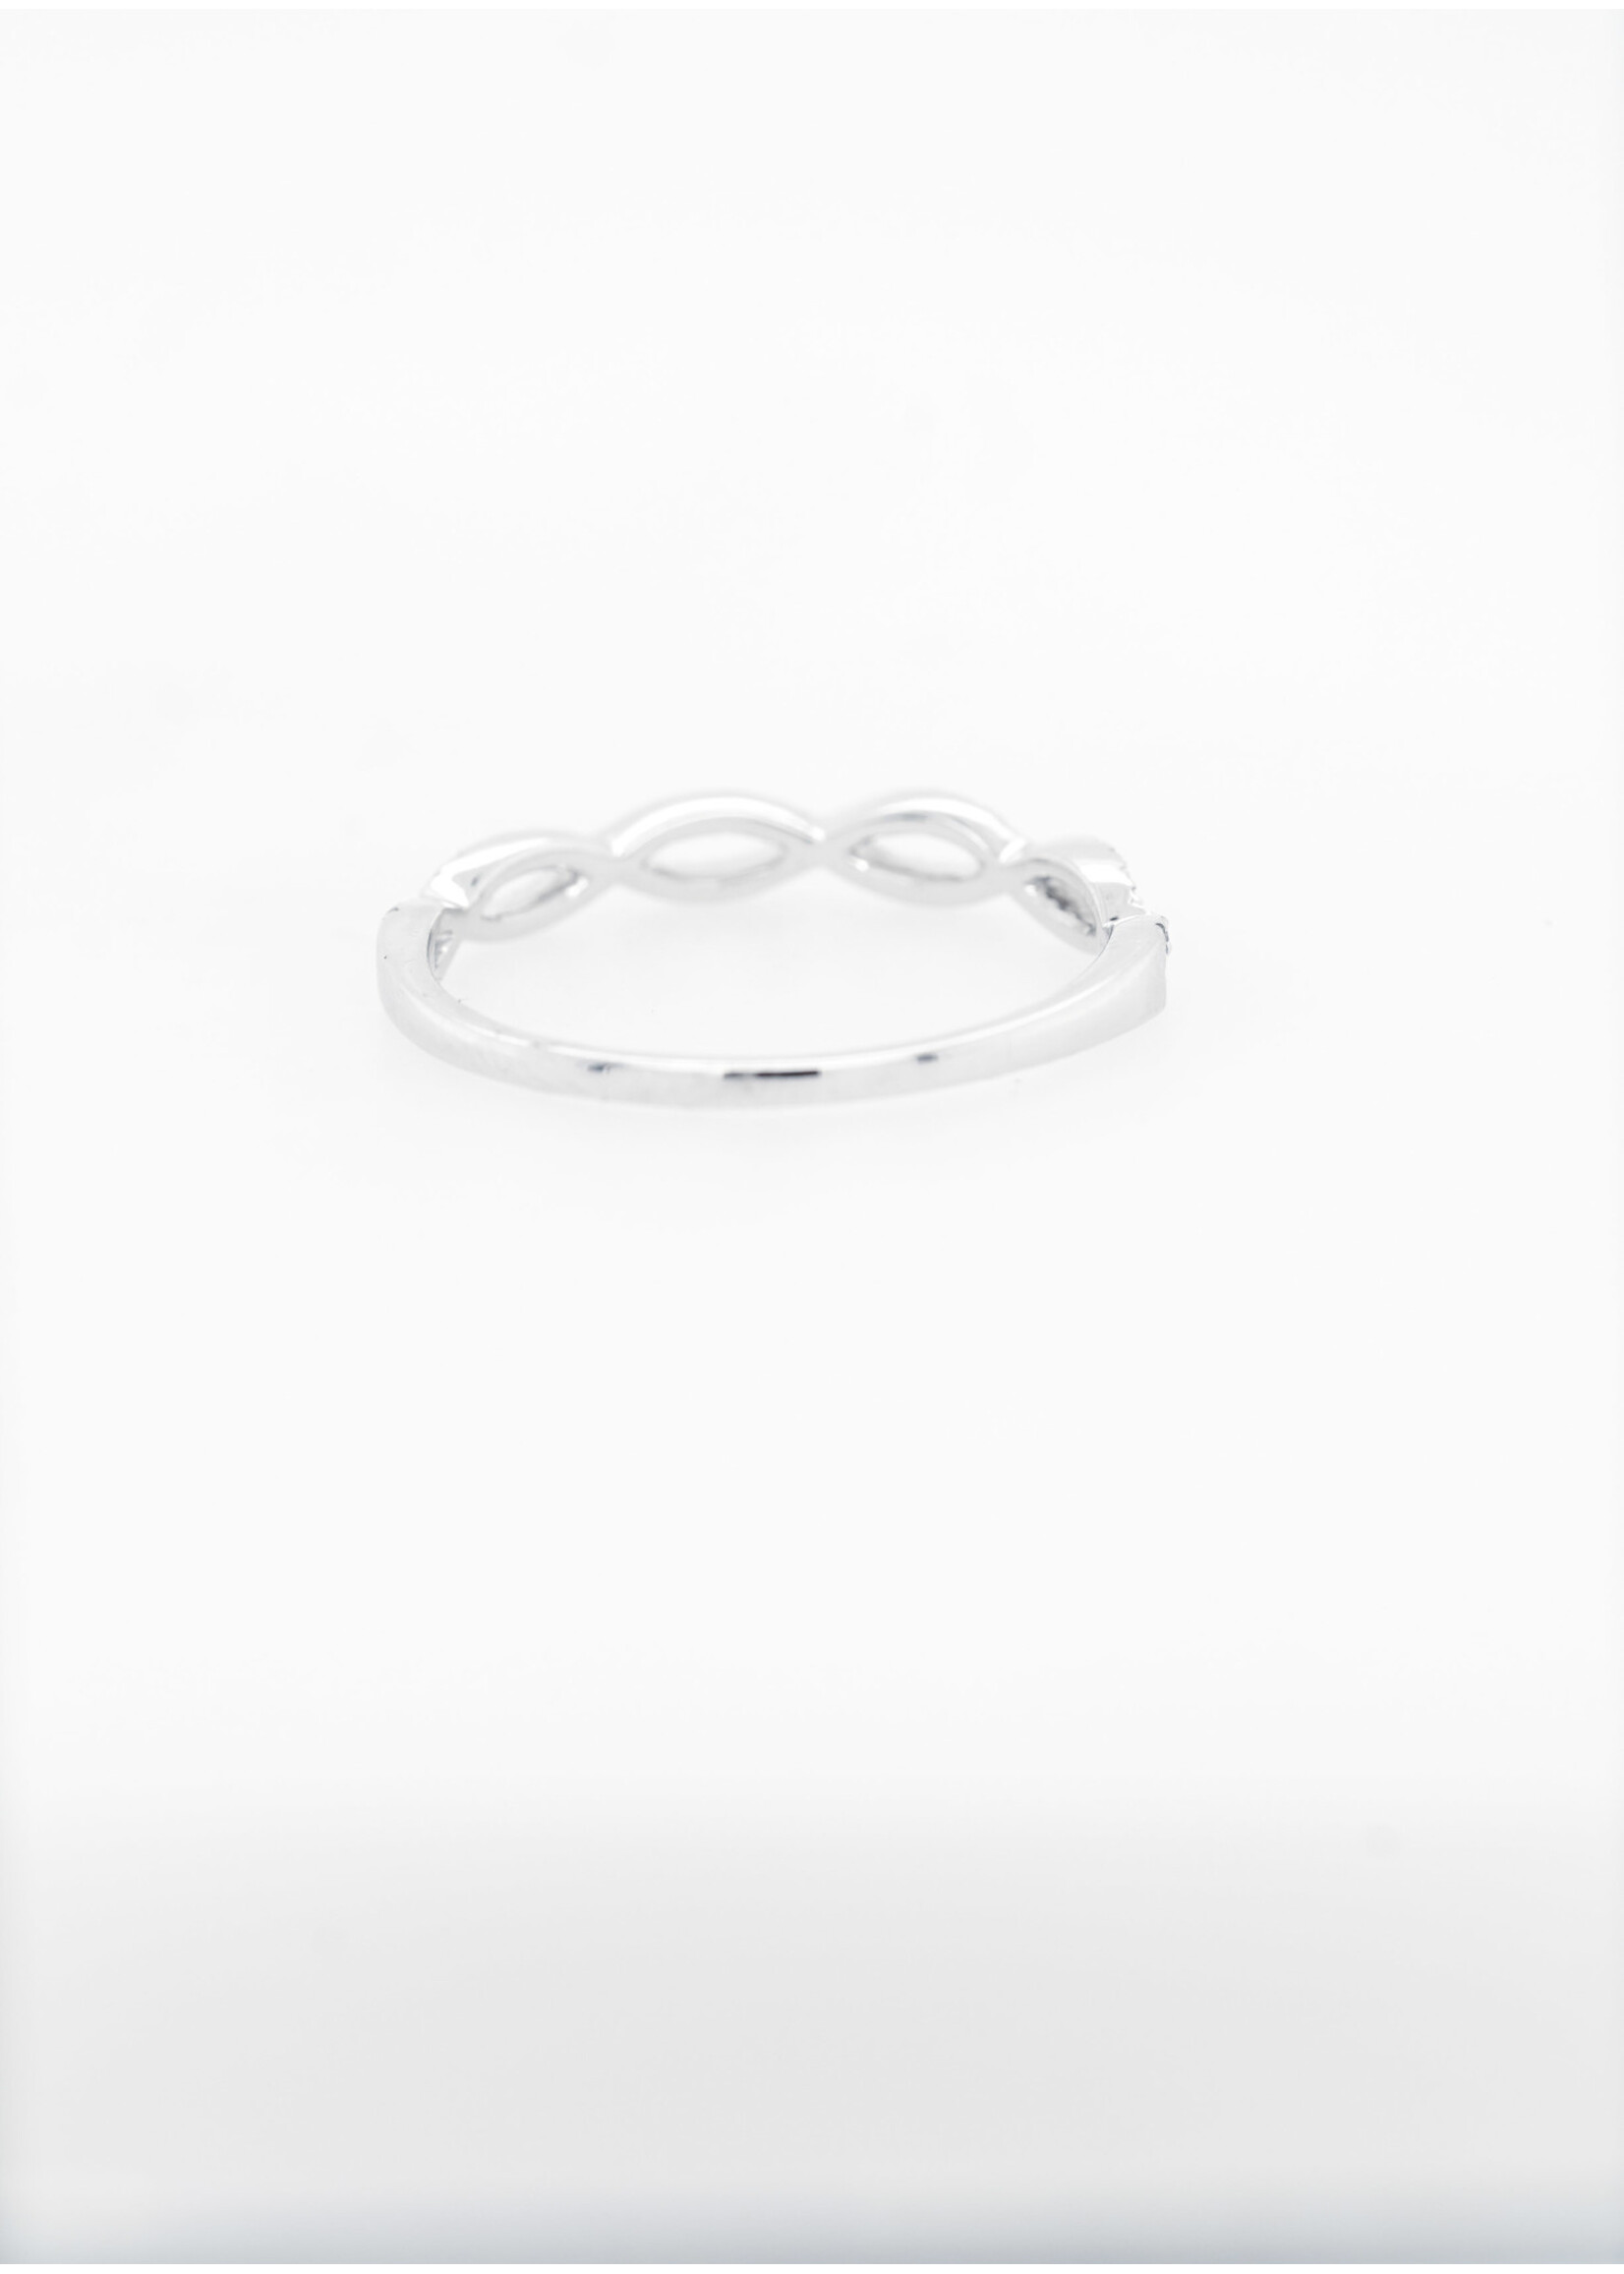 14KW 1.5g .24ctw Diamond Infinity Stackable Band (size 7)